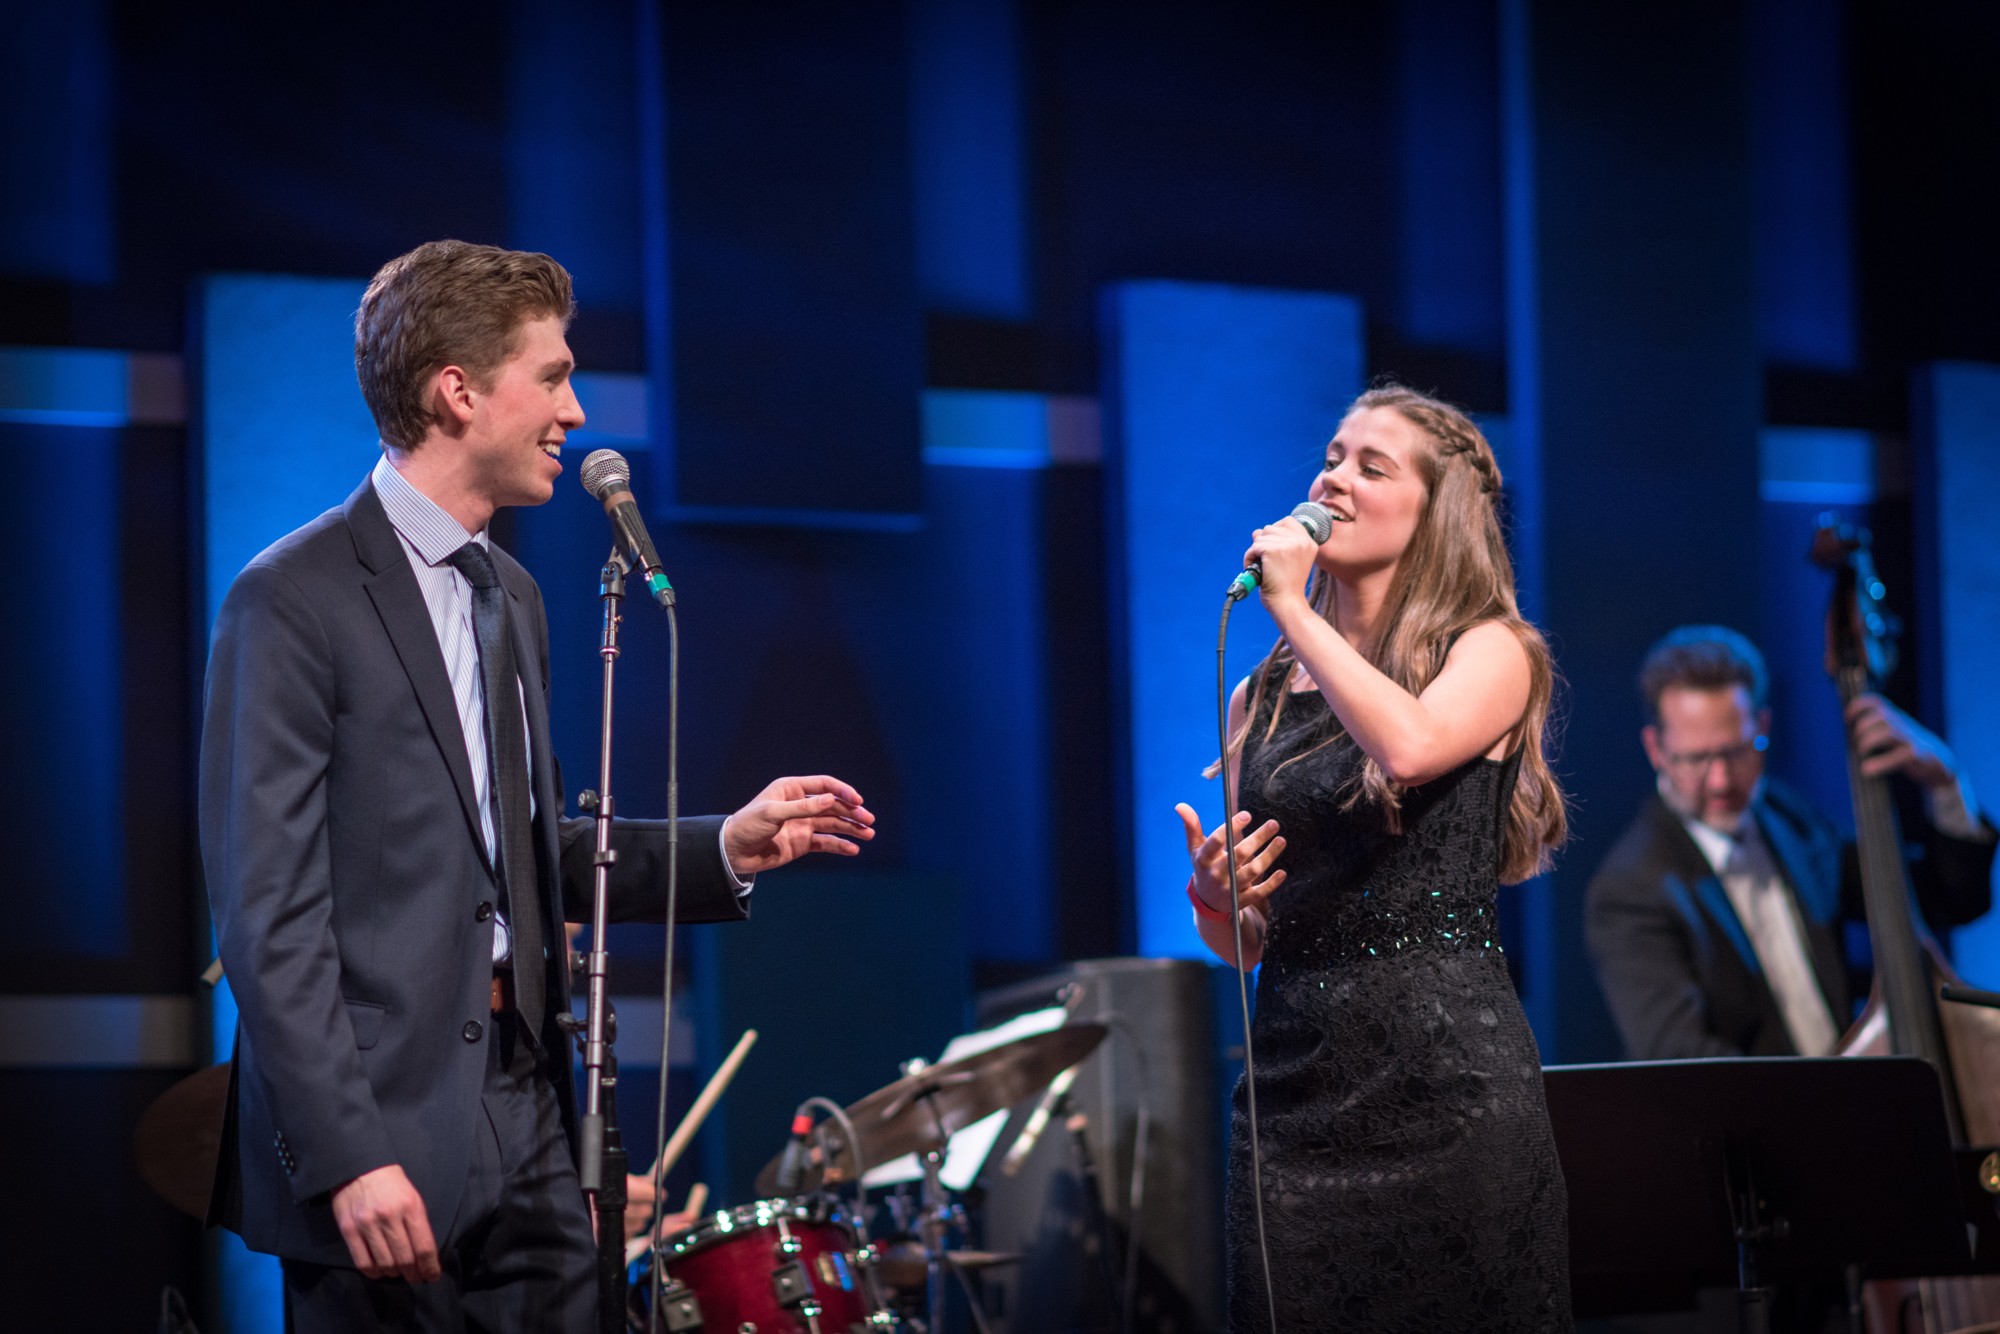 Vocalists Nick Ziobro and Julia Goodwin will join the Sarasota Orchestra for a run through love songs in the American Songbook. (Courtesy photo)